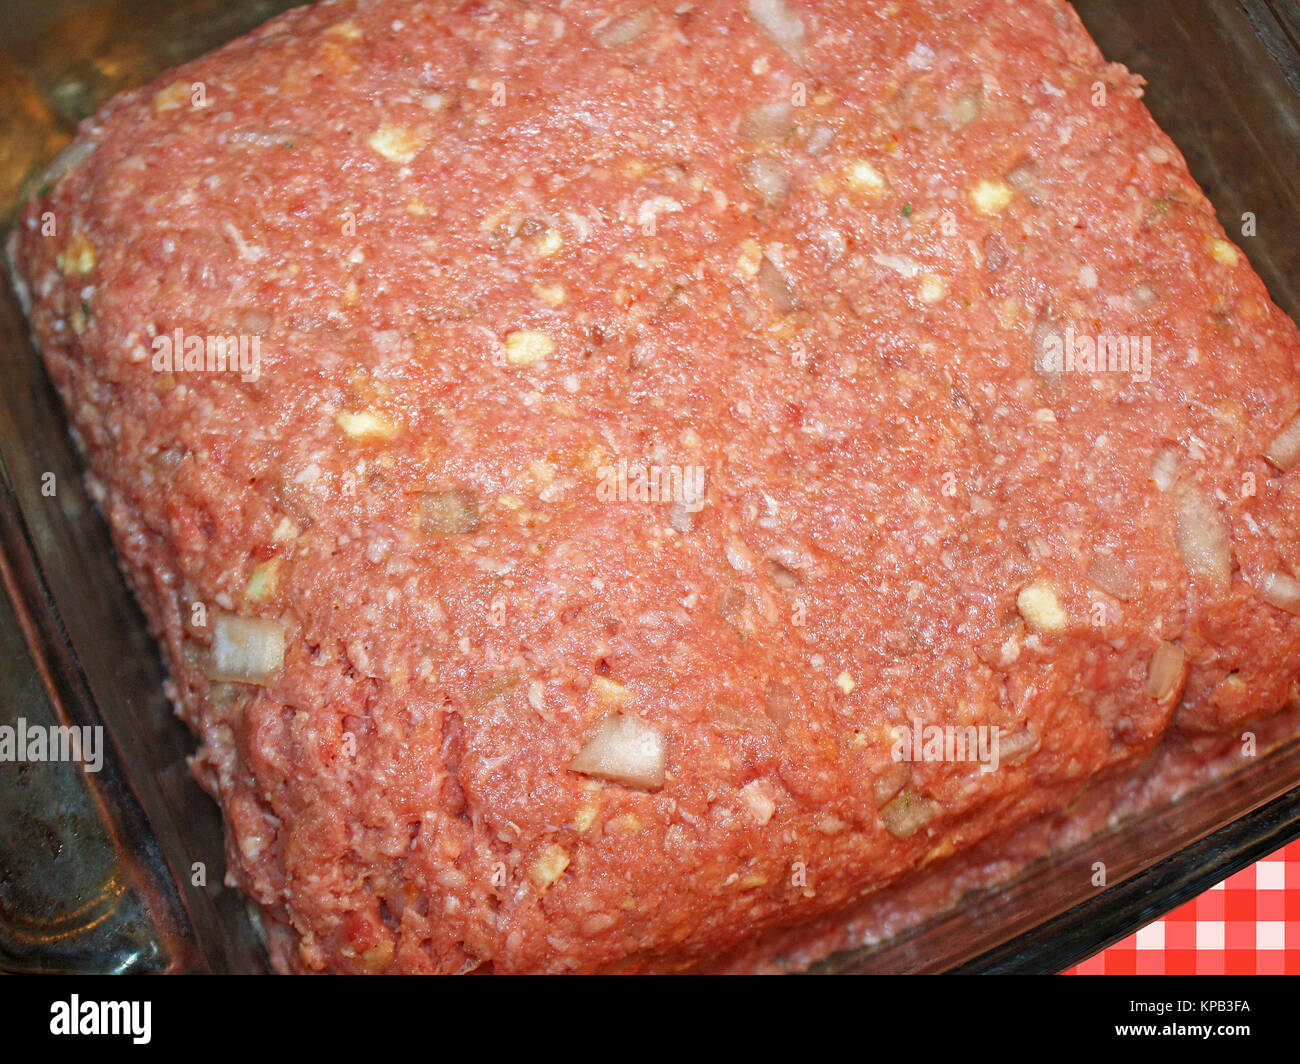 Meatloaf using lean ground beef, onions, crushed crackers and seasonings in a casserole dish ready for cooking Stock Photo